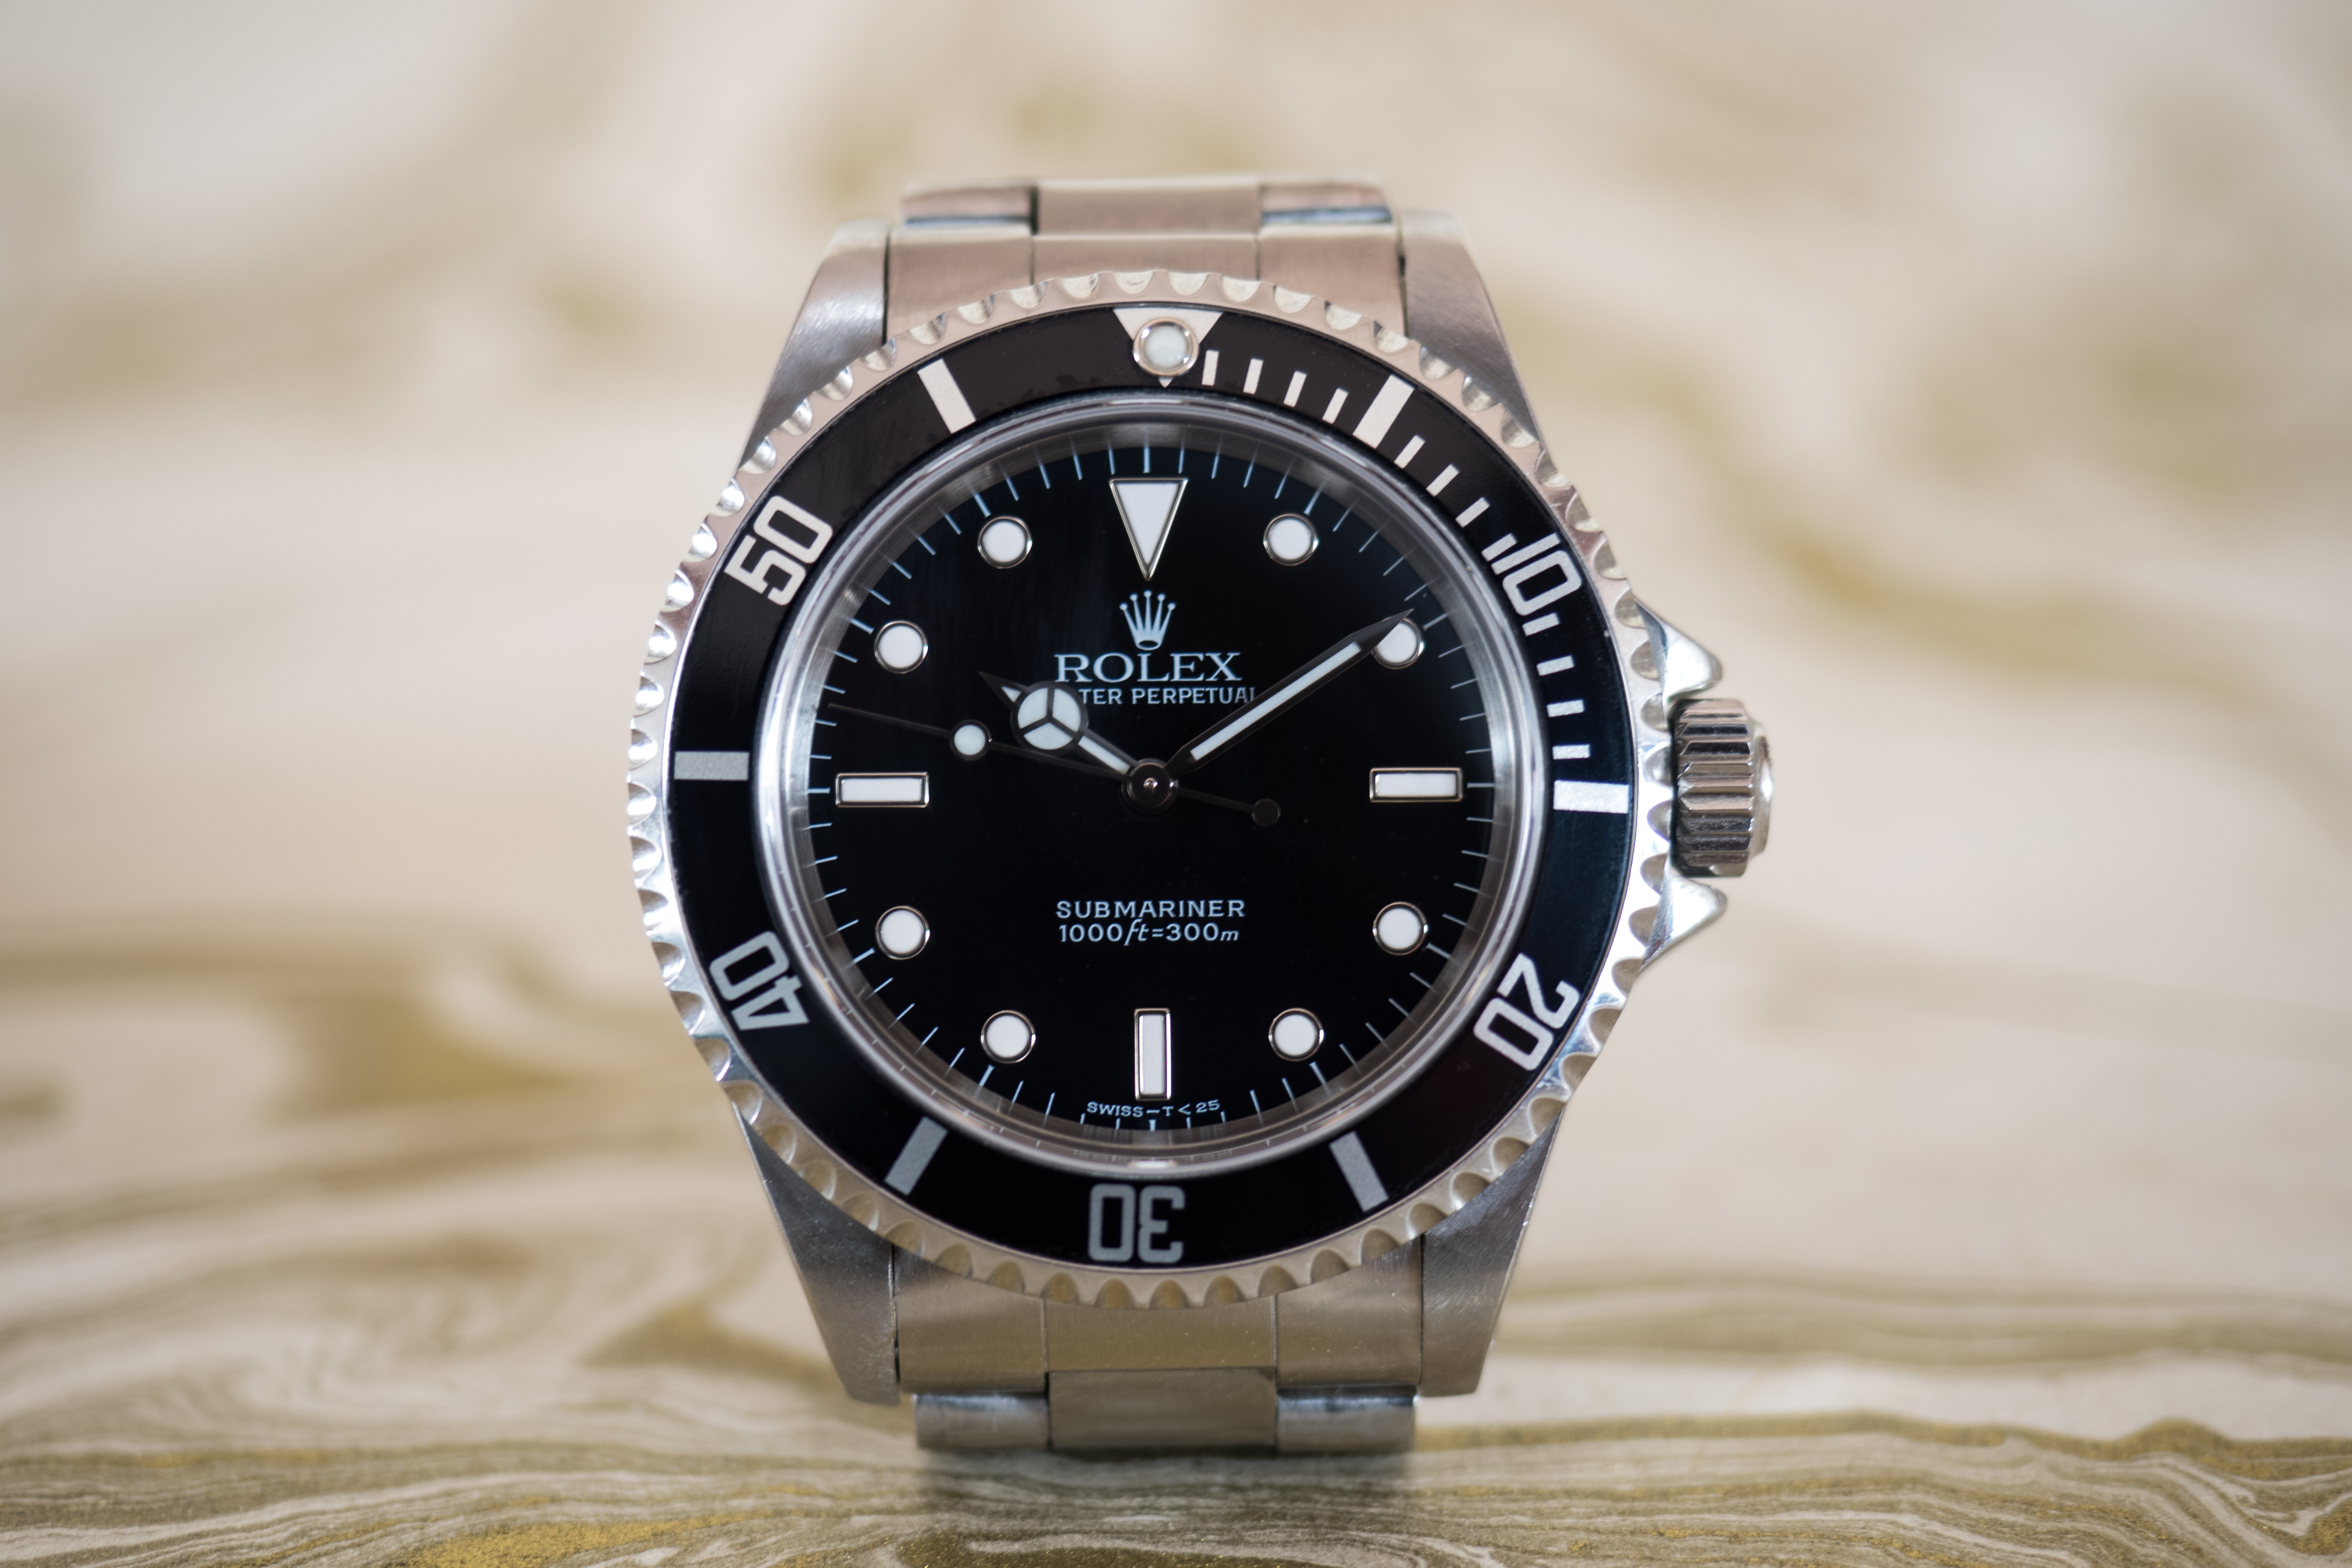 Jaeger-LeCoultre Introduces The Polaris Mariner: A Pair Of Serious ISO 6425- Rated Dive Watches | aBlogtoWatch